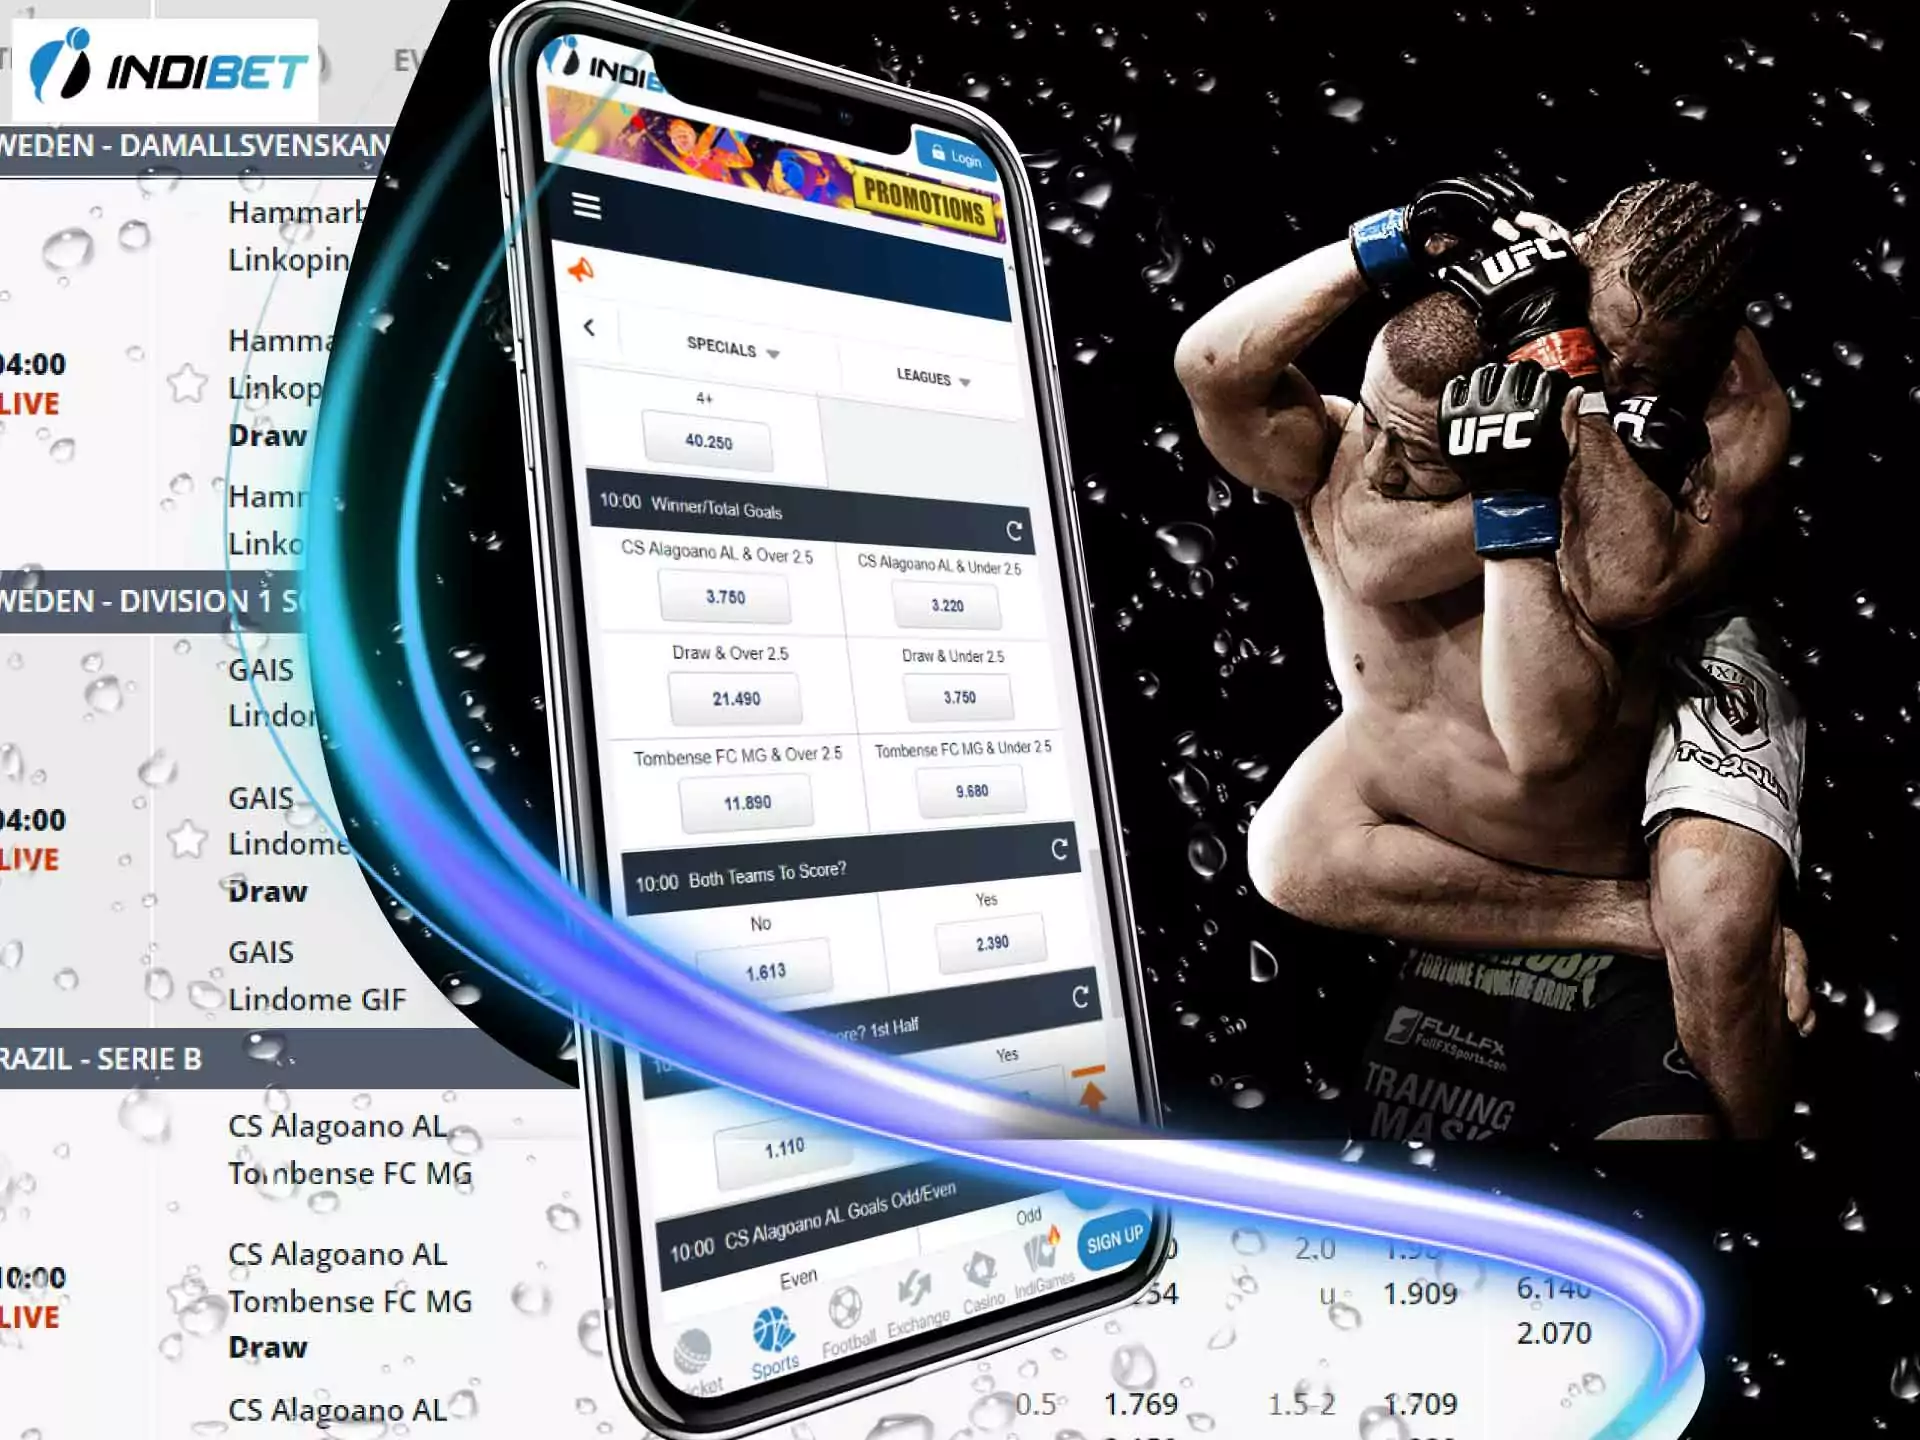 You can bet on any UFC fighter at Indibet.